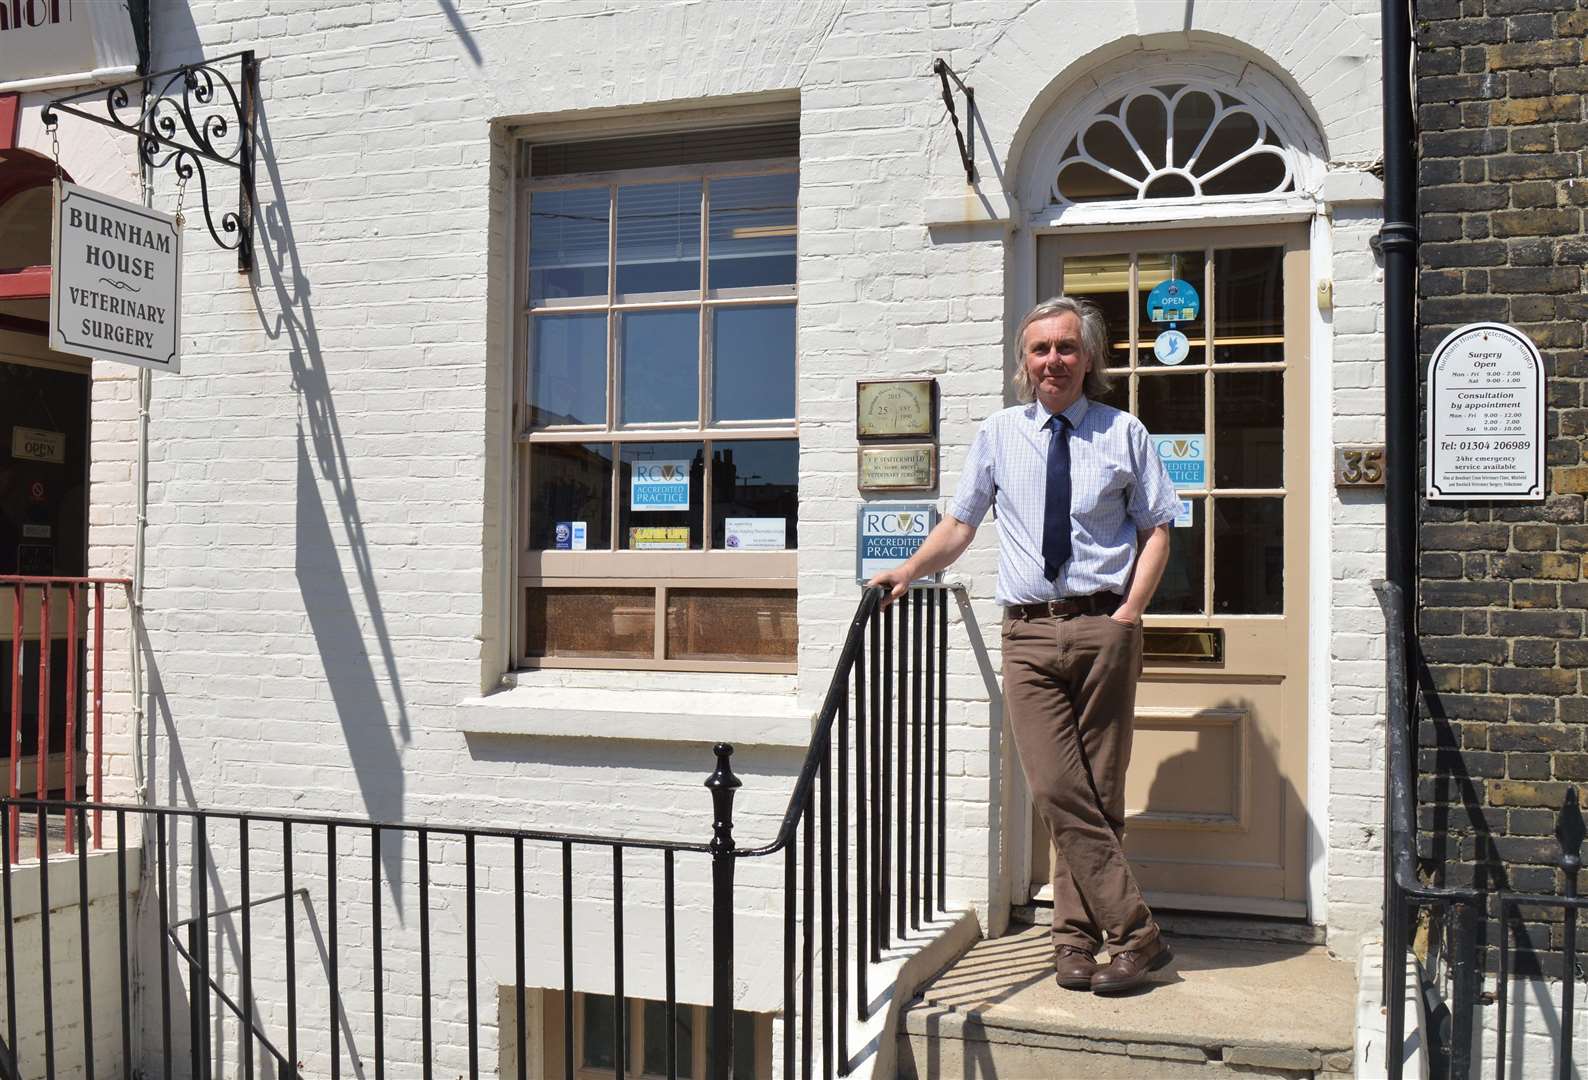 Practice principle Jeremy Stattersfield at Burnham House Veterinary Surgery is running two new services